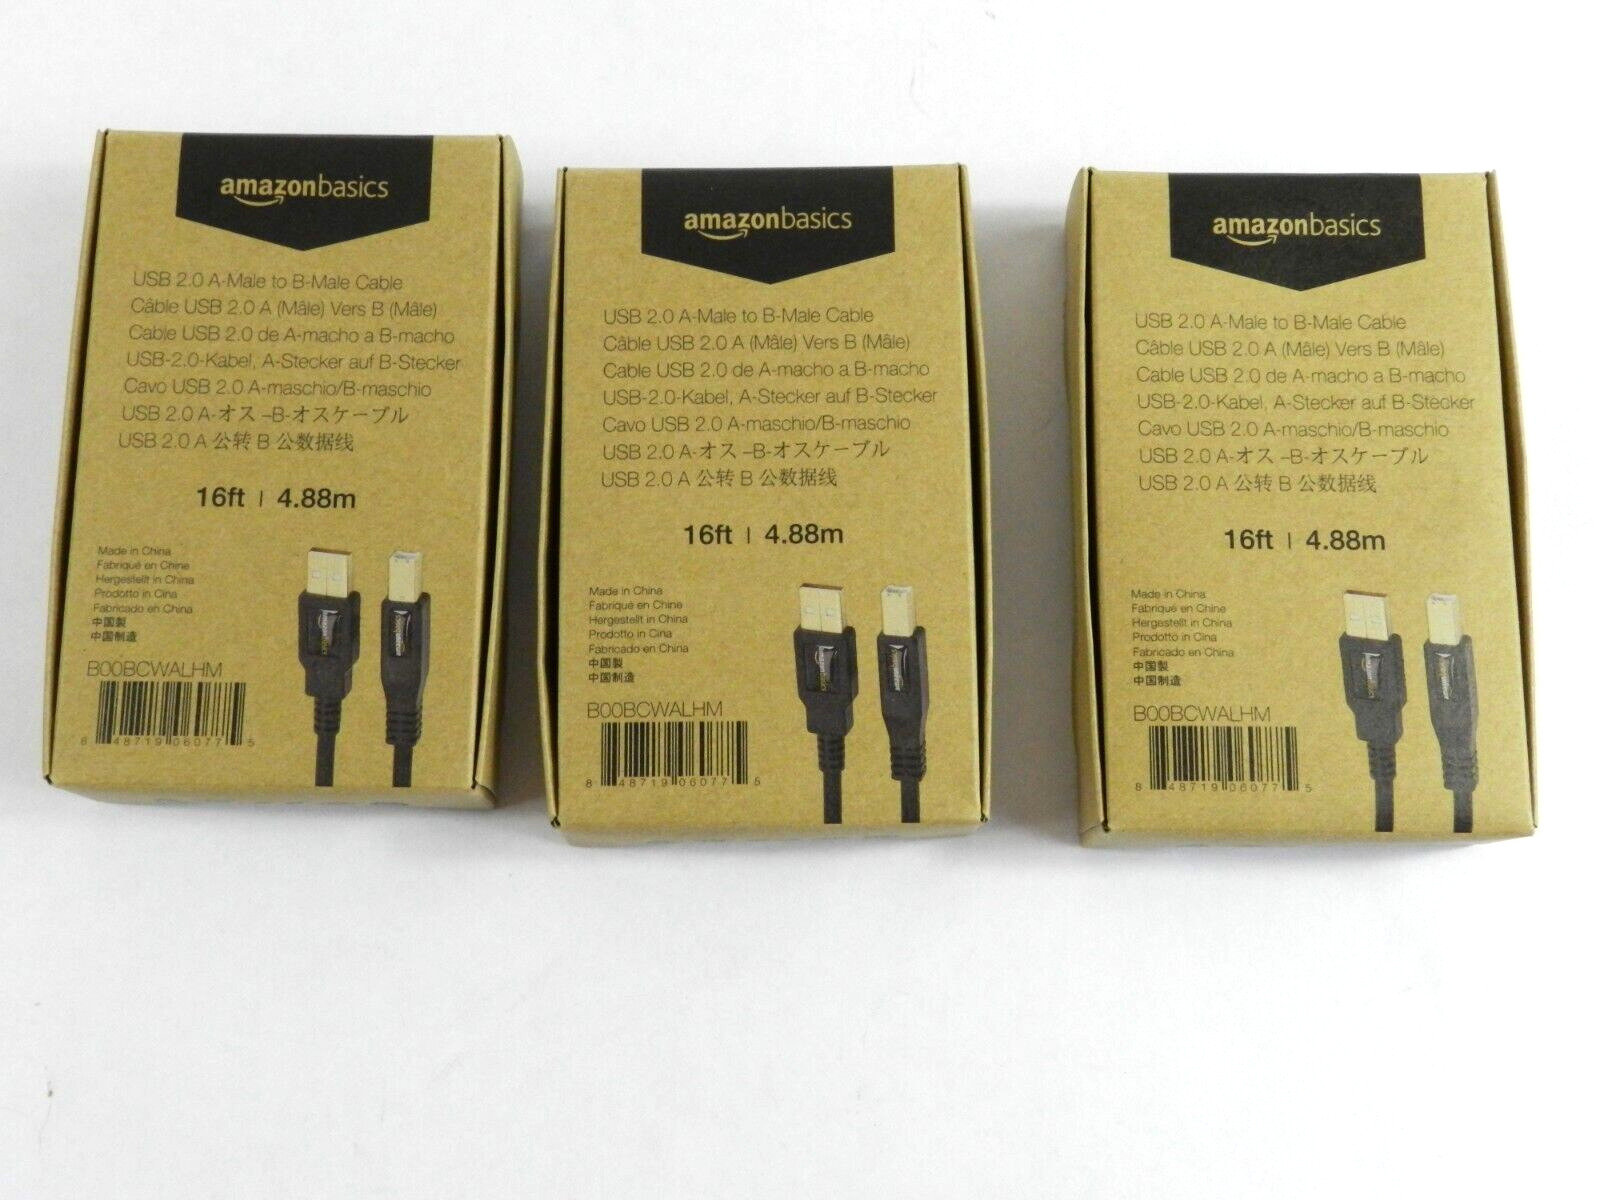 LOT 3 AmazonBasics PC045 16ft USB 2.0 Male to B Male Cable BRAND NEW